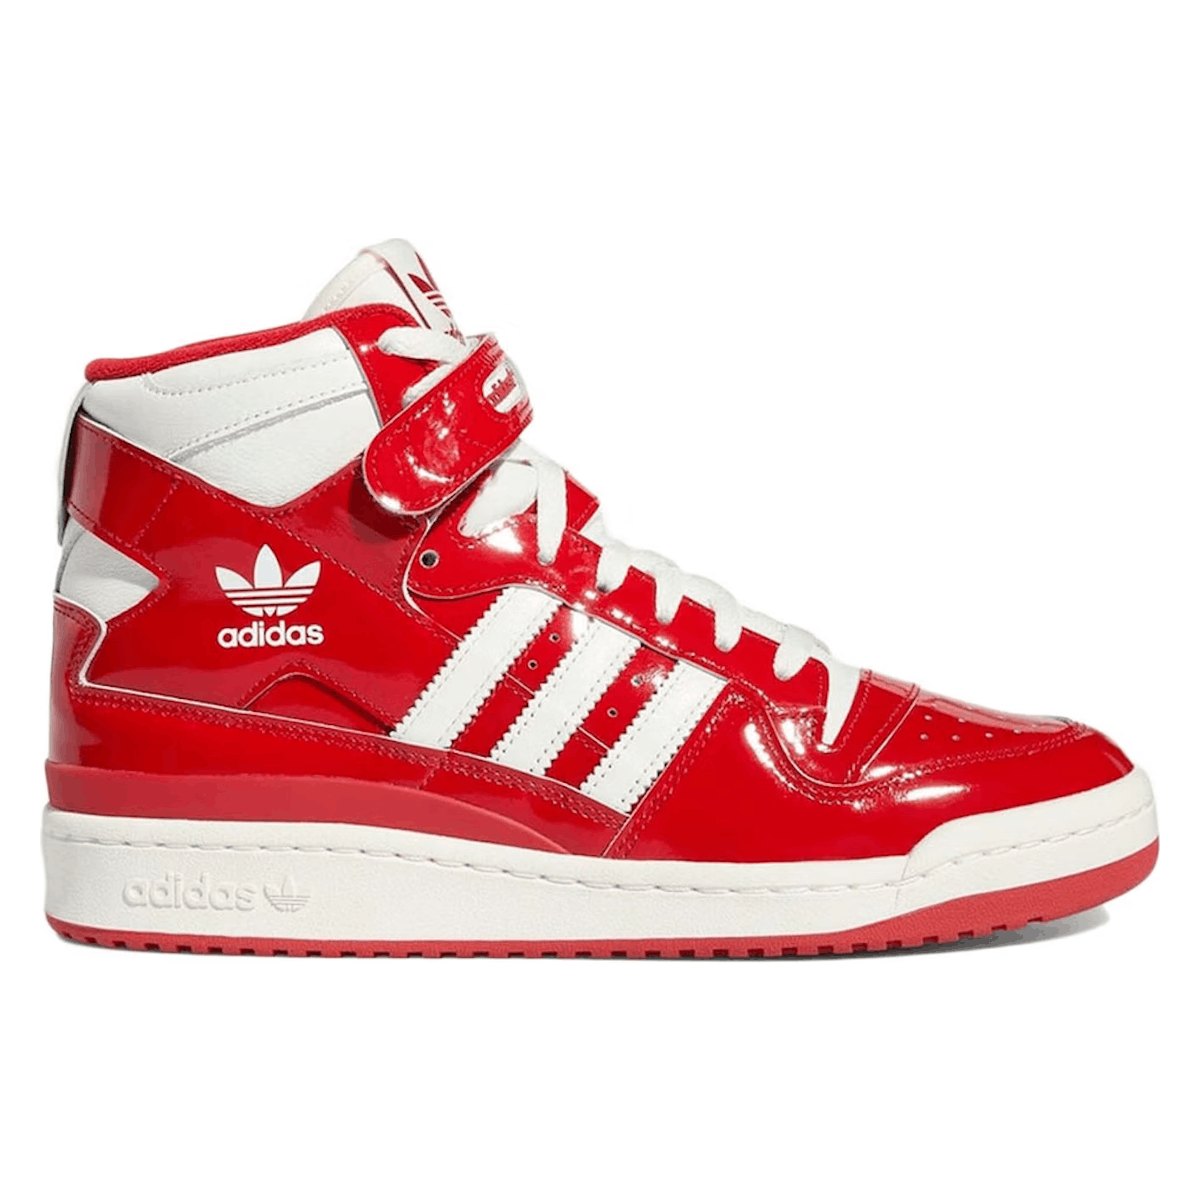 Adidas Forum 84 High "Patent Red"